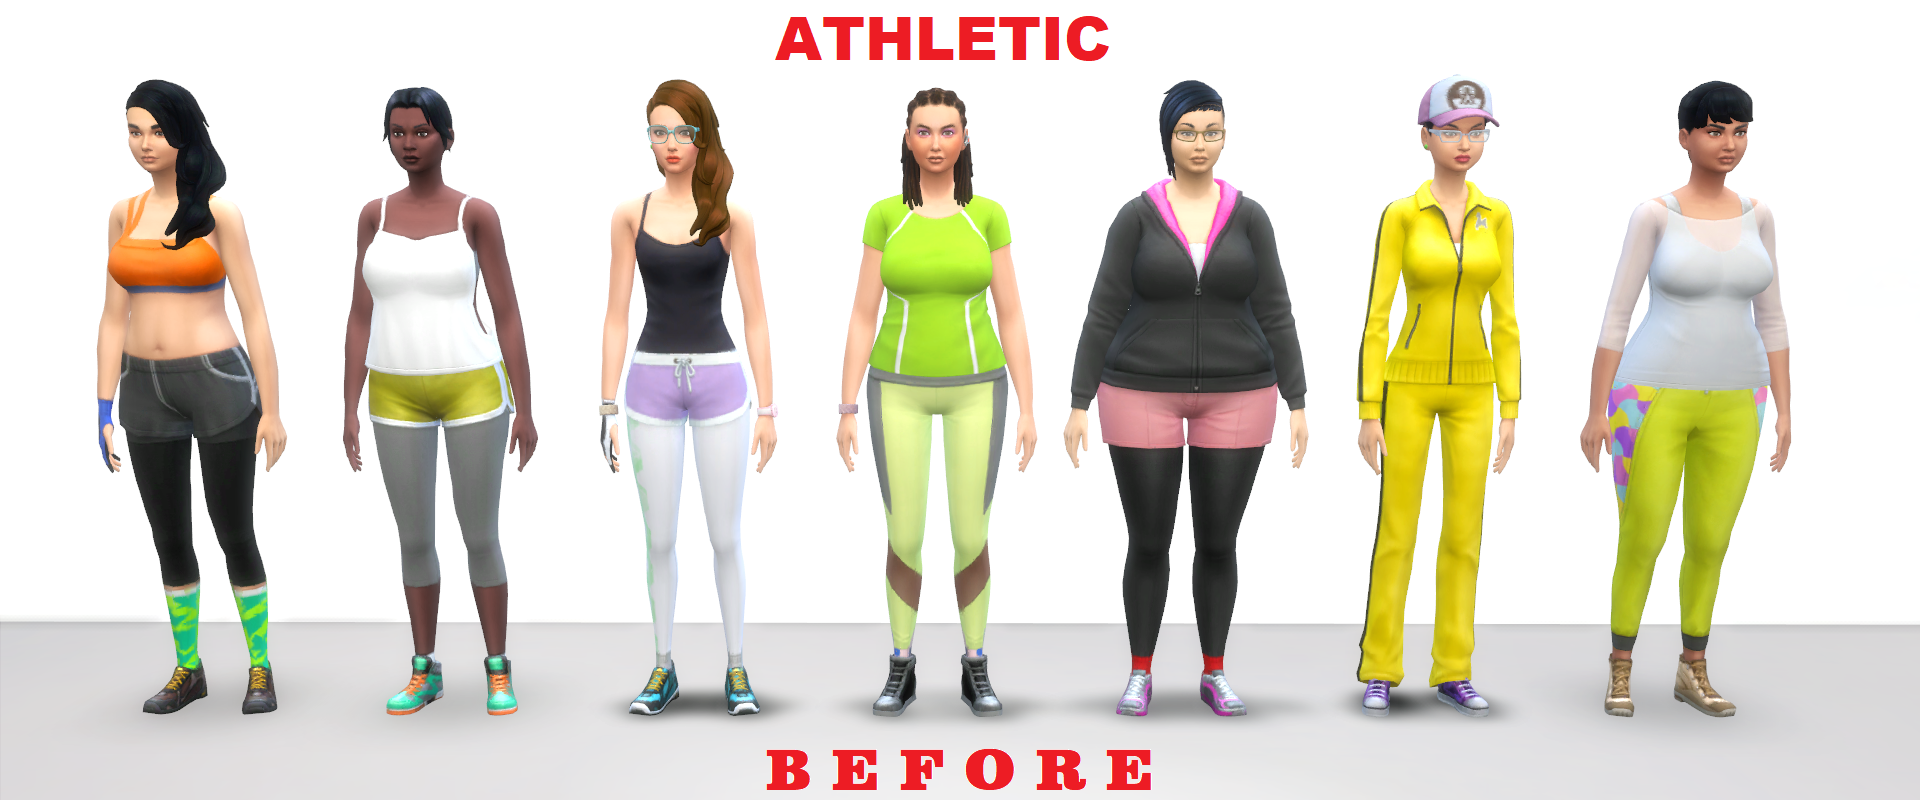 Athletic1.png.a5ce67982efda32a4b3a7055172ce4f7.png